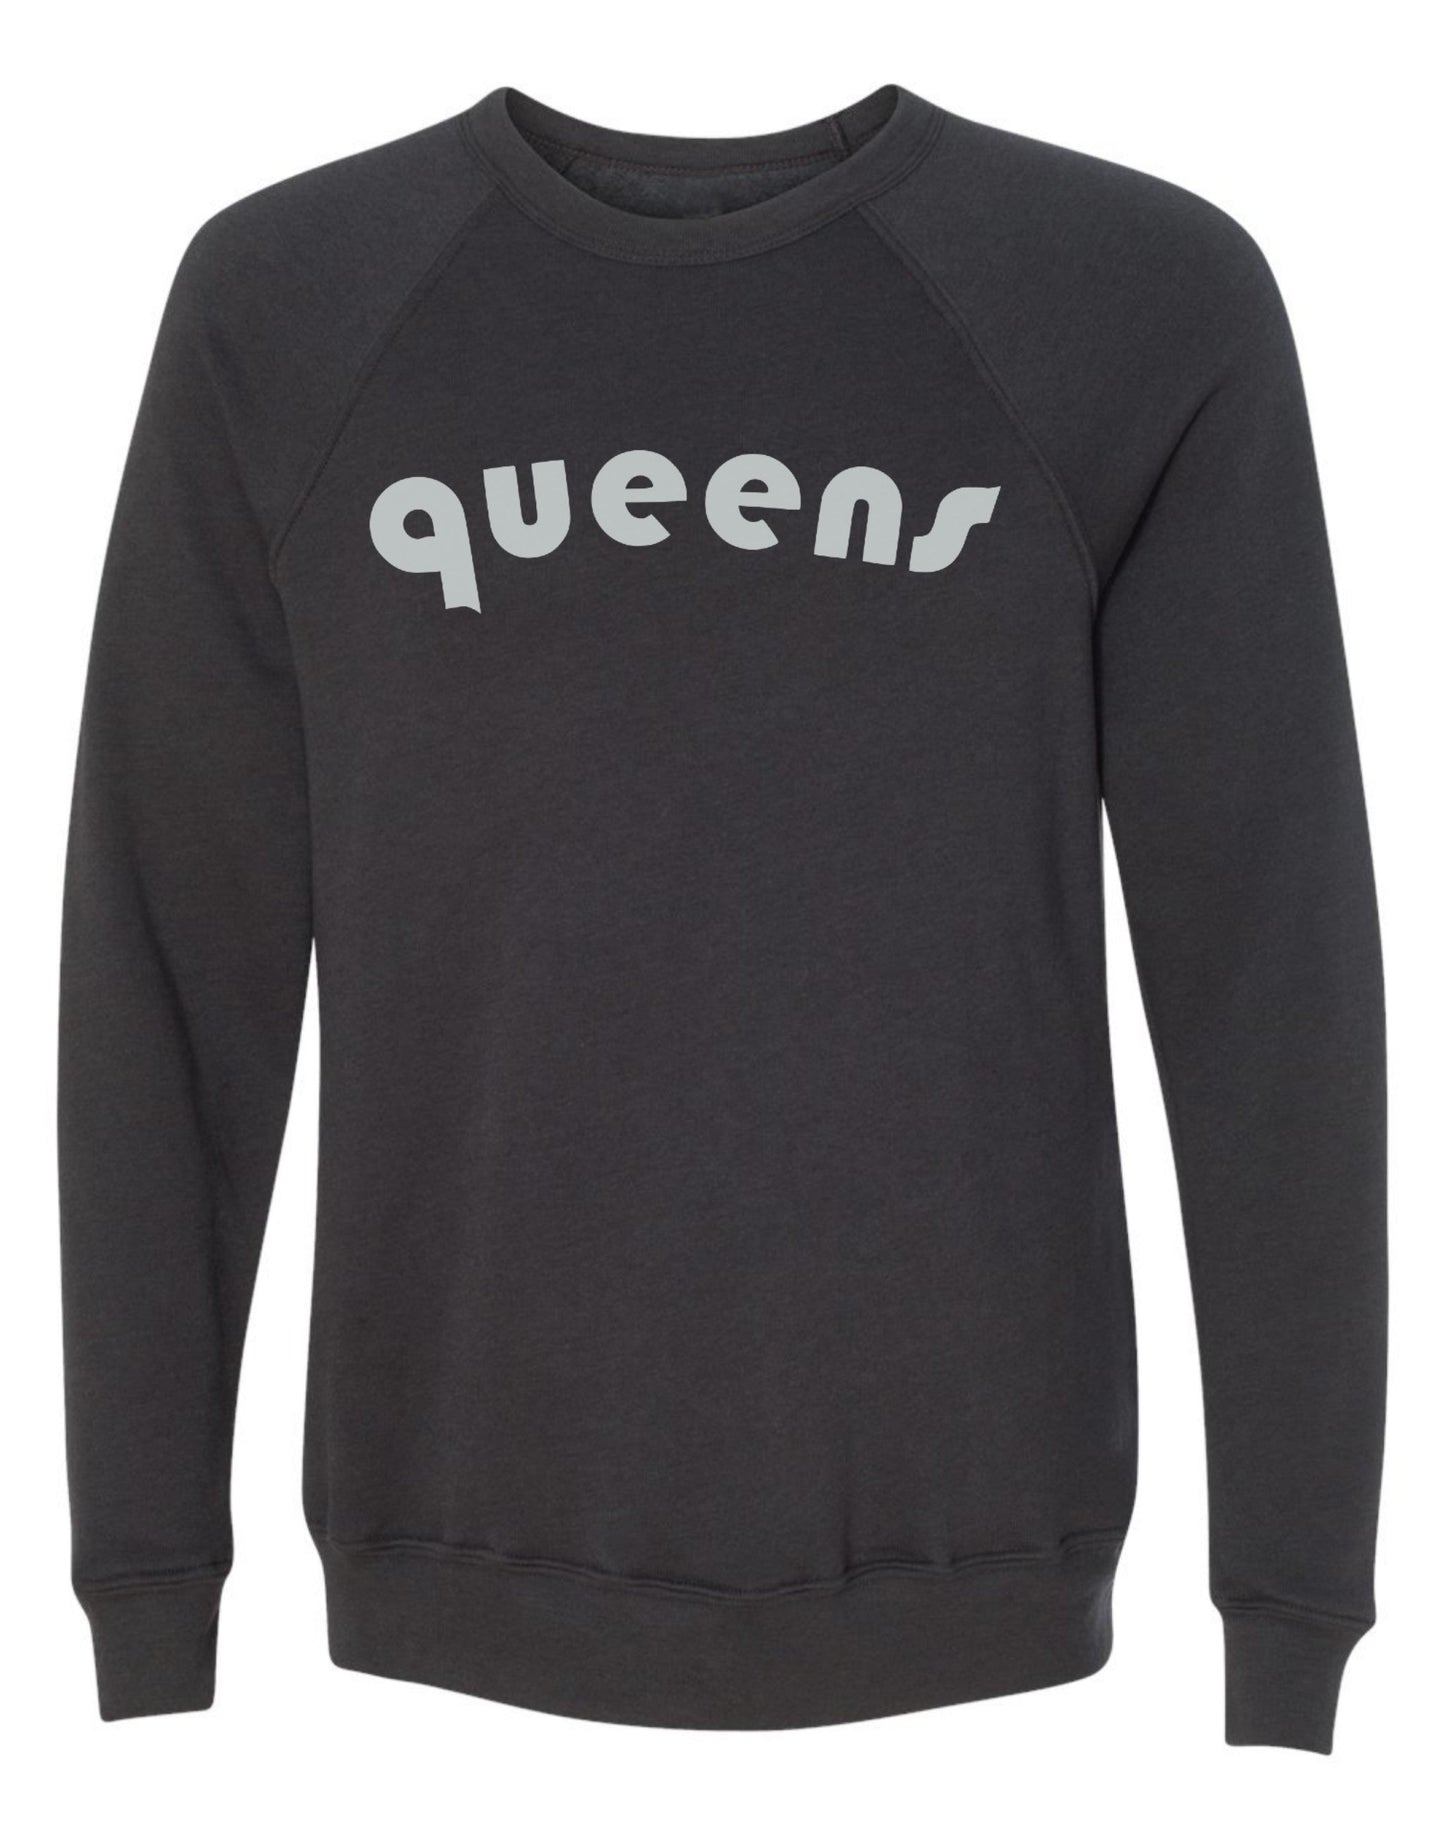 Sale- Queens, NY Sweater, LARGE